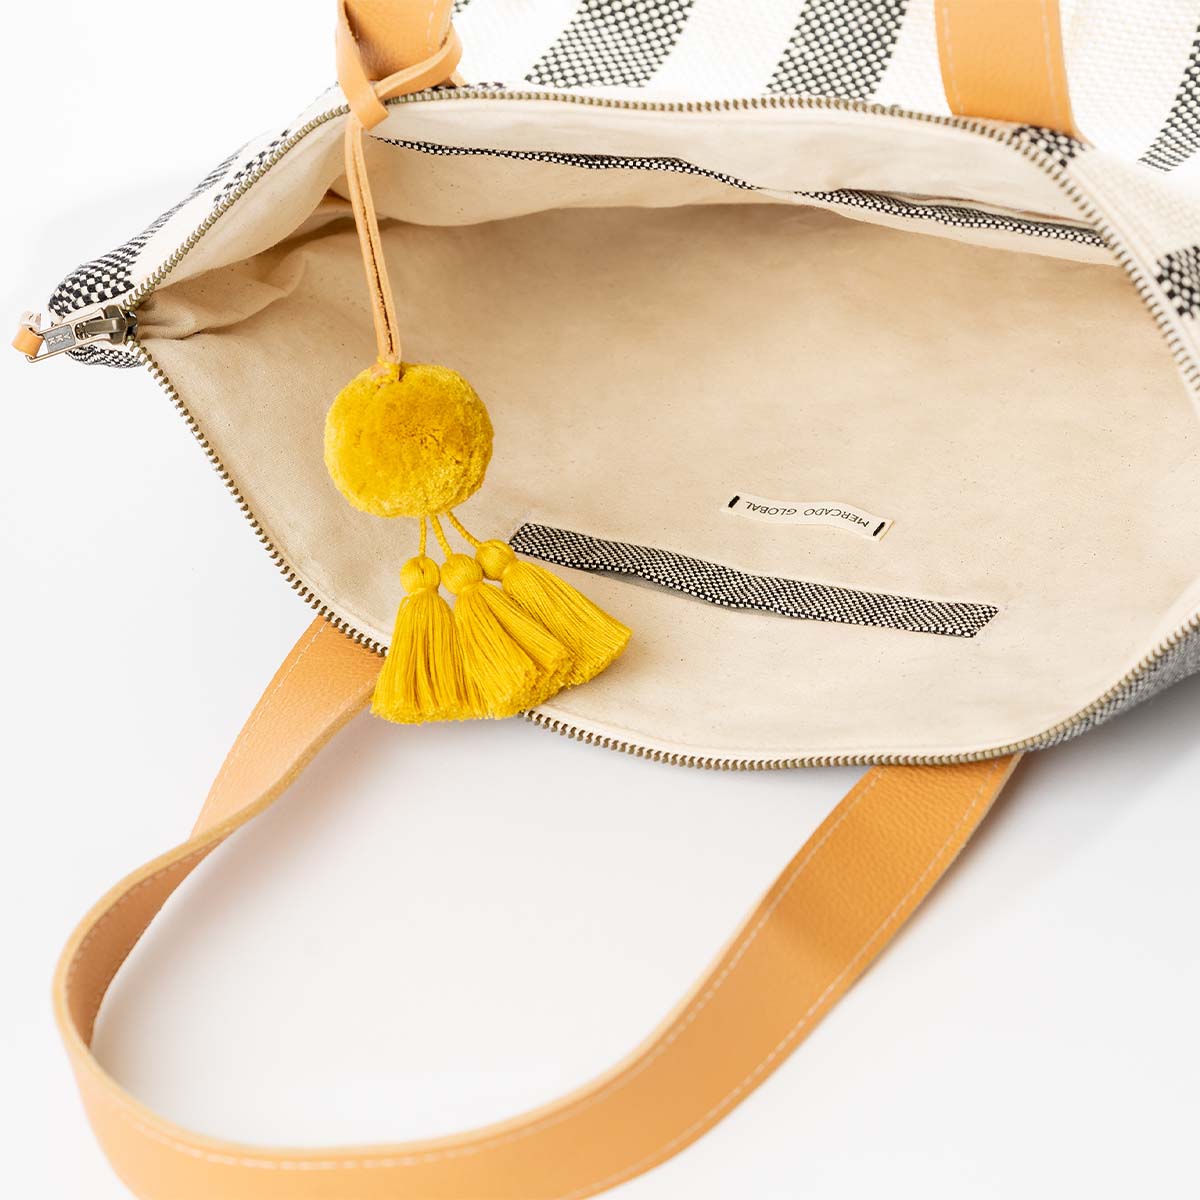 A zoomed-in image of the interior of the Angela Tote in Tourmaline pattern. It has grey and white vertical stripes, leather handles, and a yellow pompom-tassel combination. The interior has a beige fabric color block and a woven black and white hem.